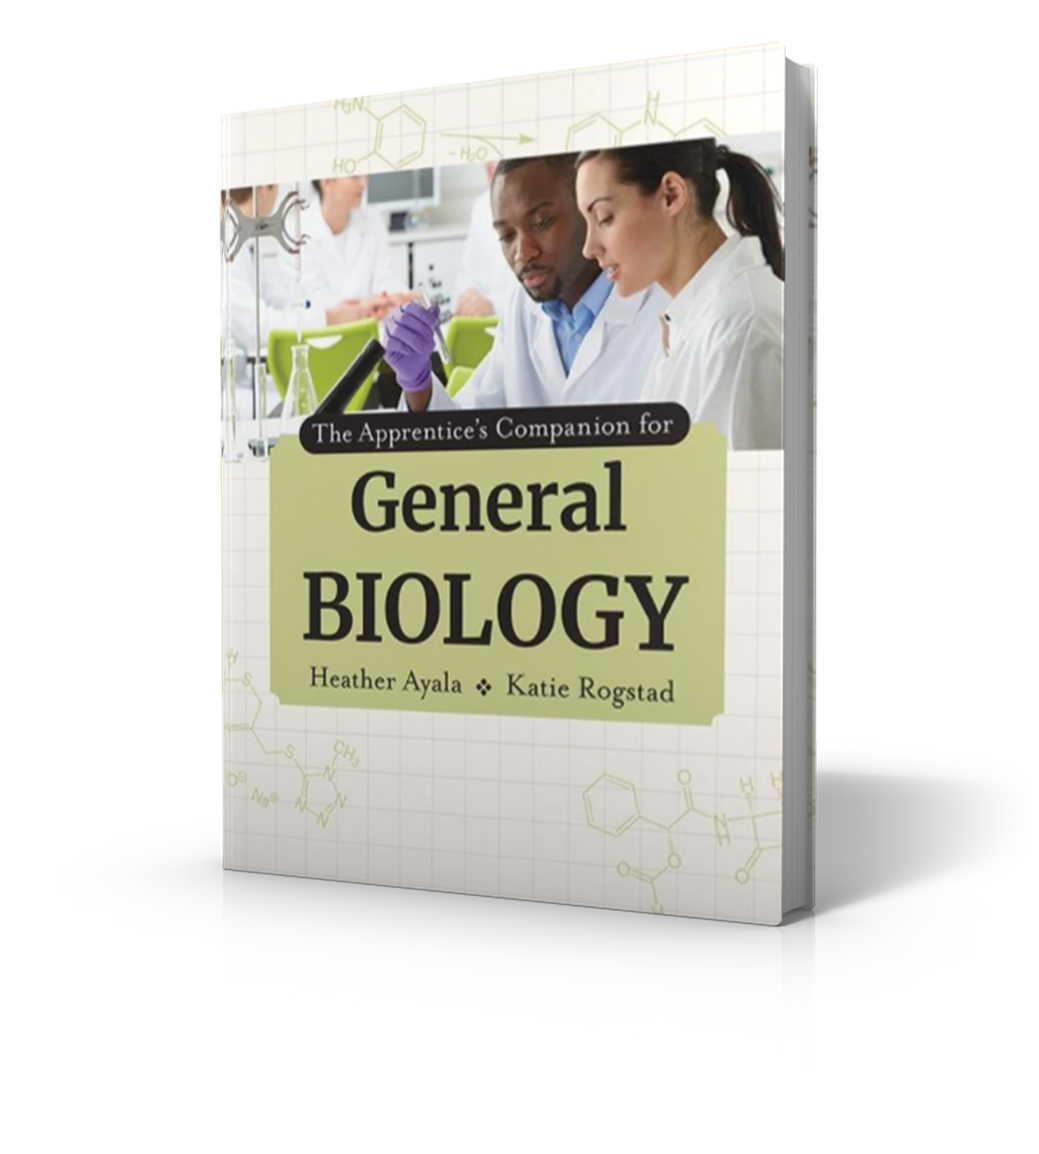 The Apprentice’s Companion for General Biology